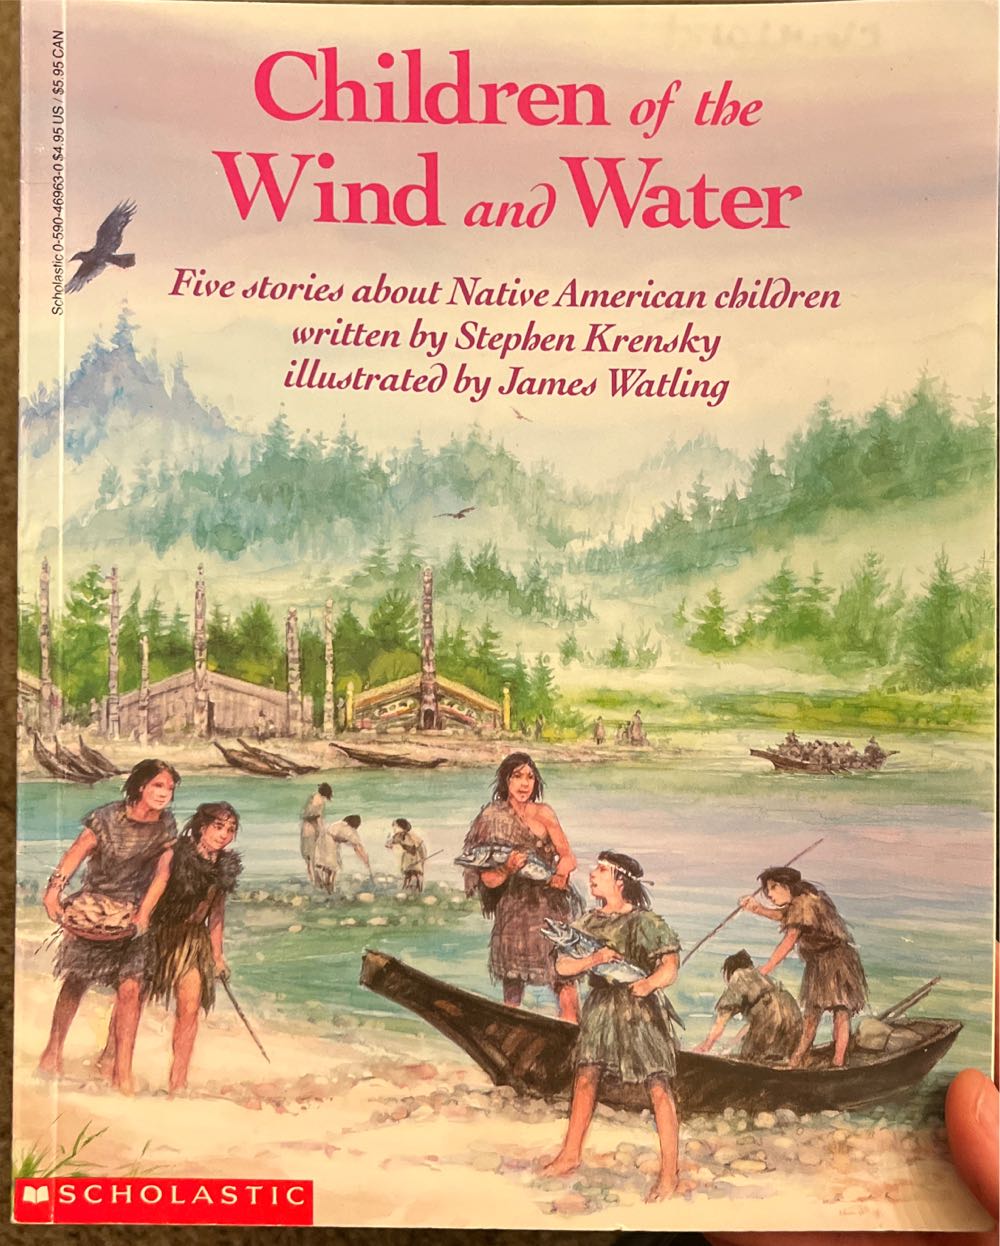 Children of the Wind and Water xG38- Human (Kids + Boy) - Dr. Stephen Krensky (A Scholastic Press - Paperback) book collectible [Barcode 9780590469630] - Main Image 2